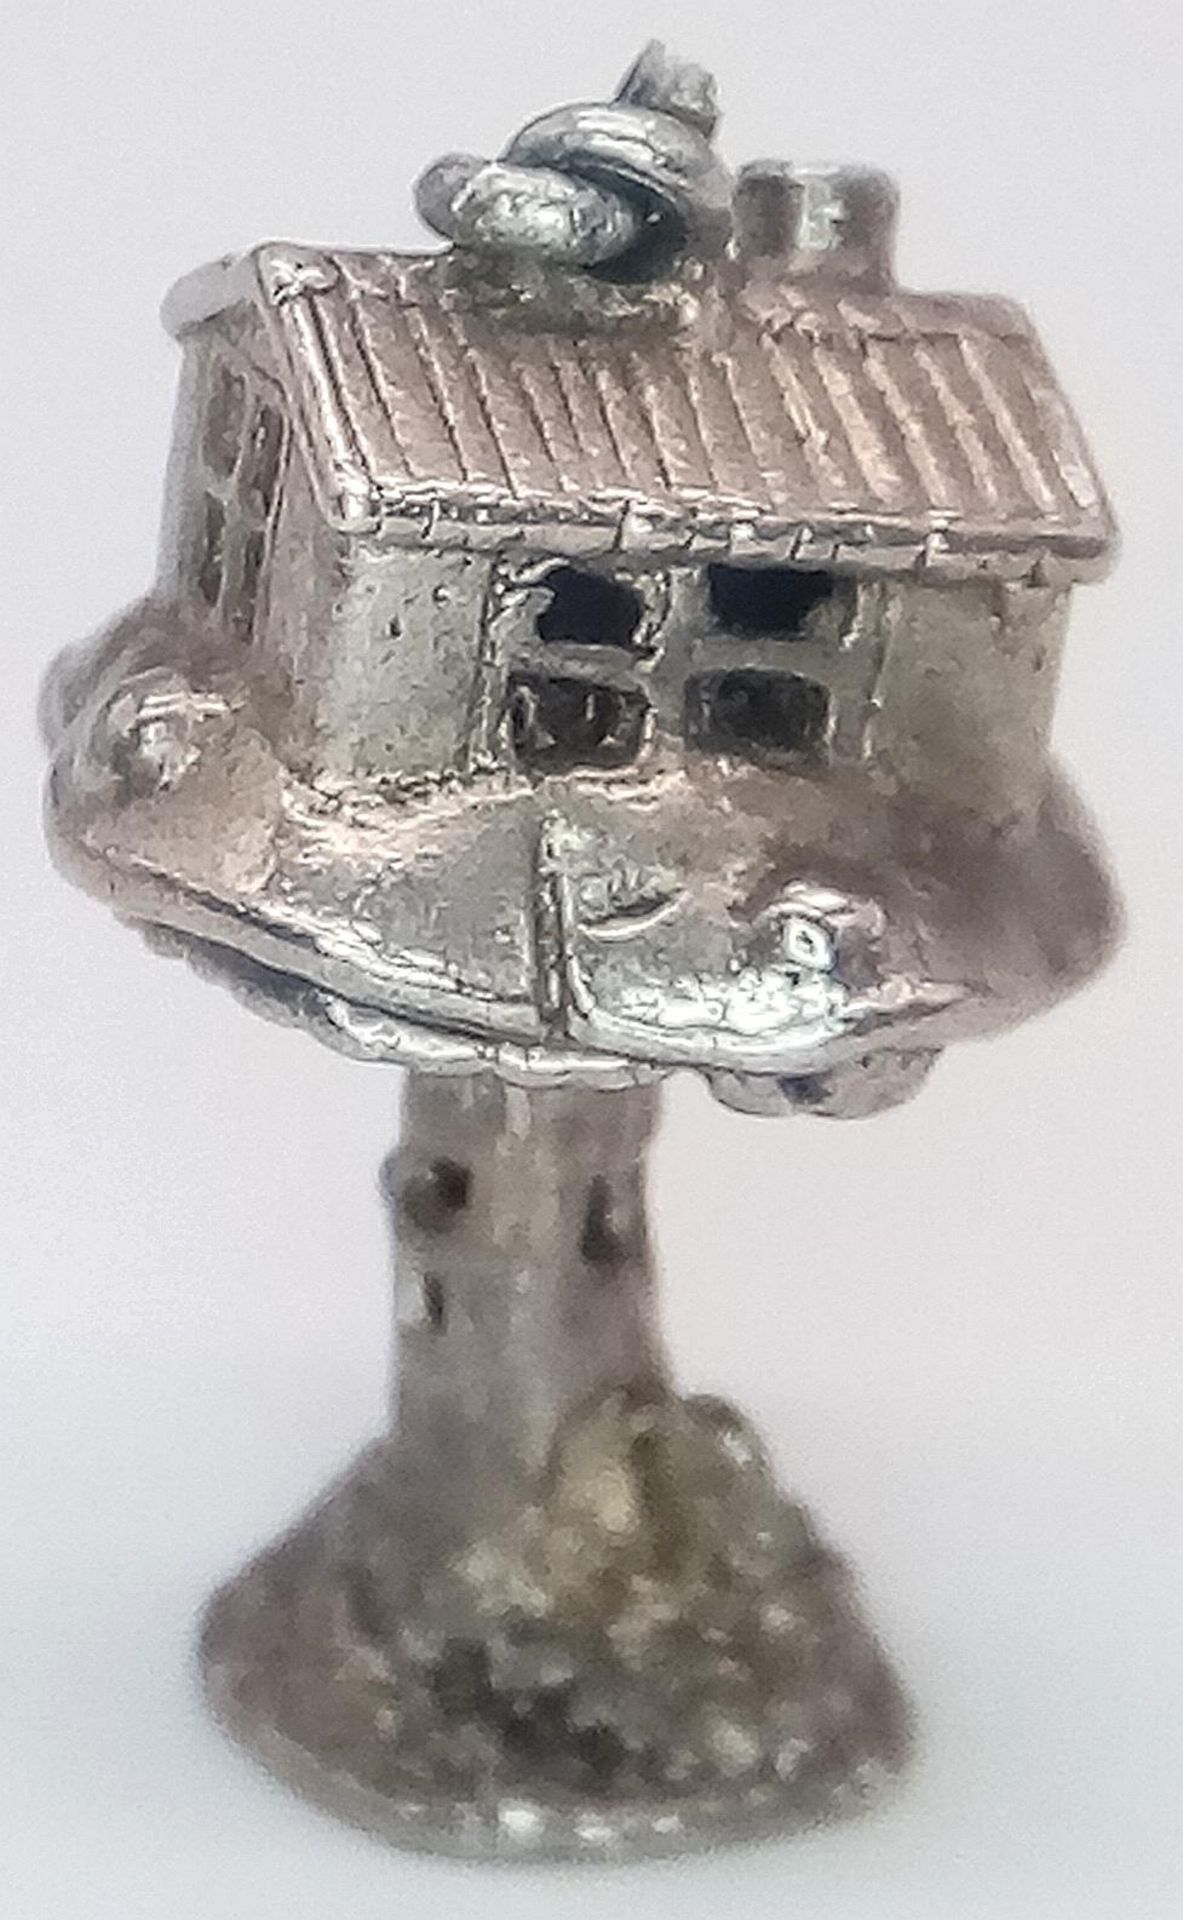 A VINTAGE STERLING SILVER TREE HOUSE CHARM, WHICH OPENS TO REVEAL A WIZARD INSIDE, WEIGHT 4G - Image 3 of 4